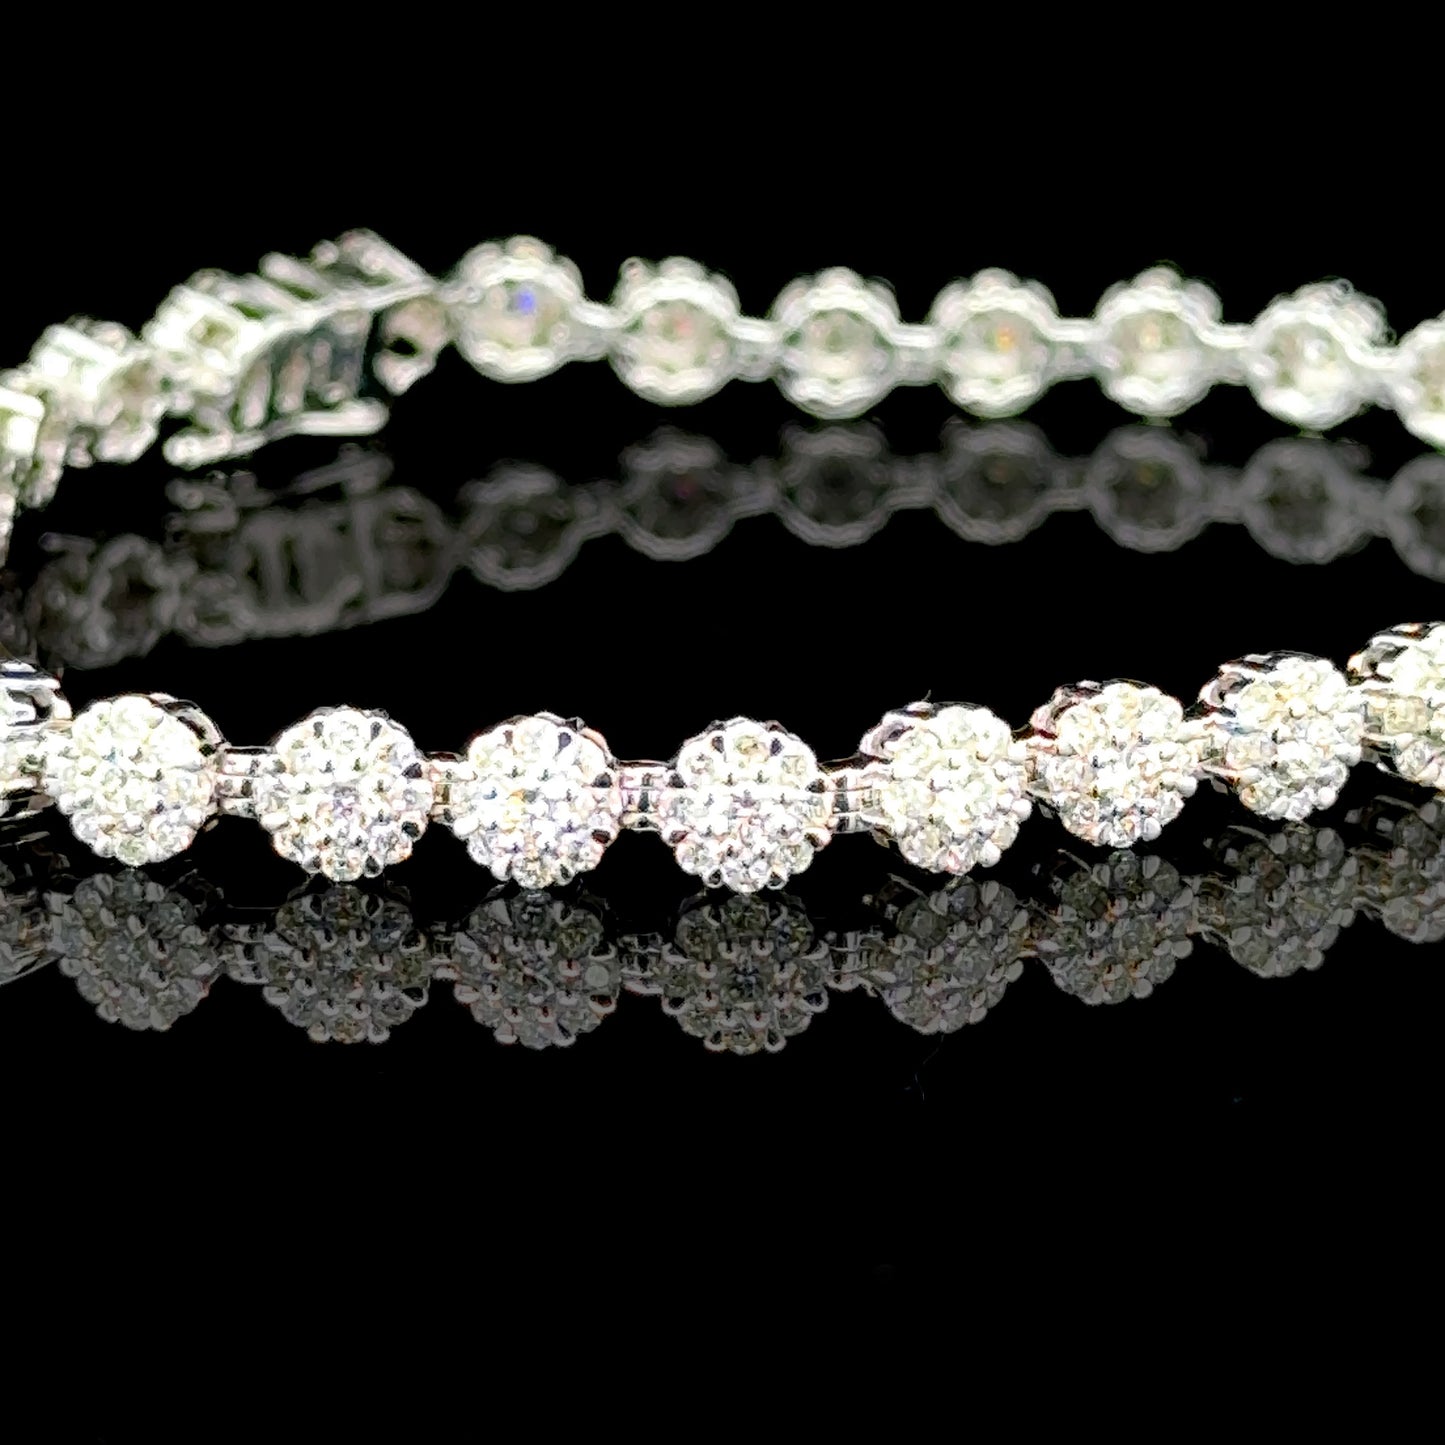 Floral bracelet with diamonds set in white gold.